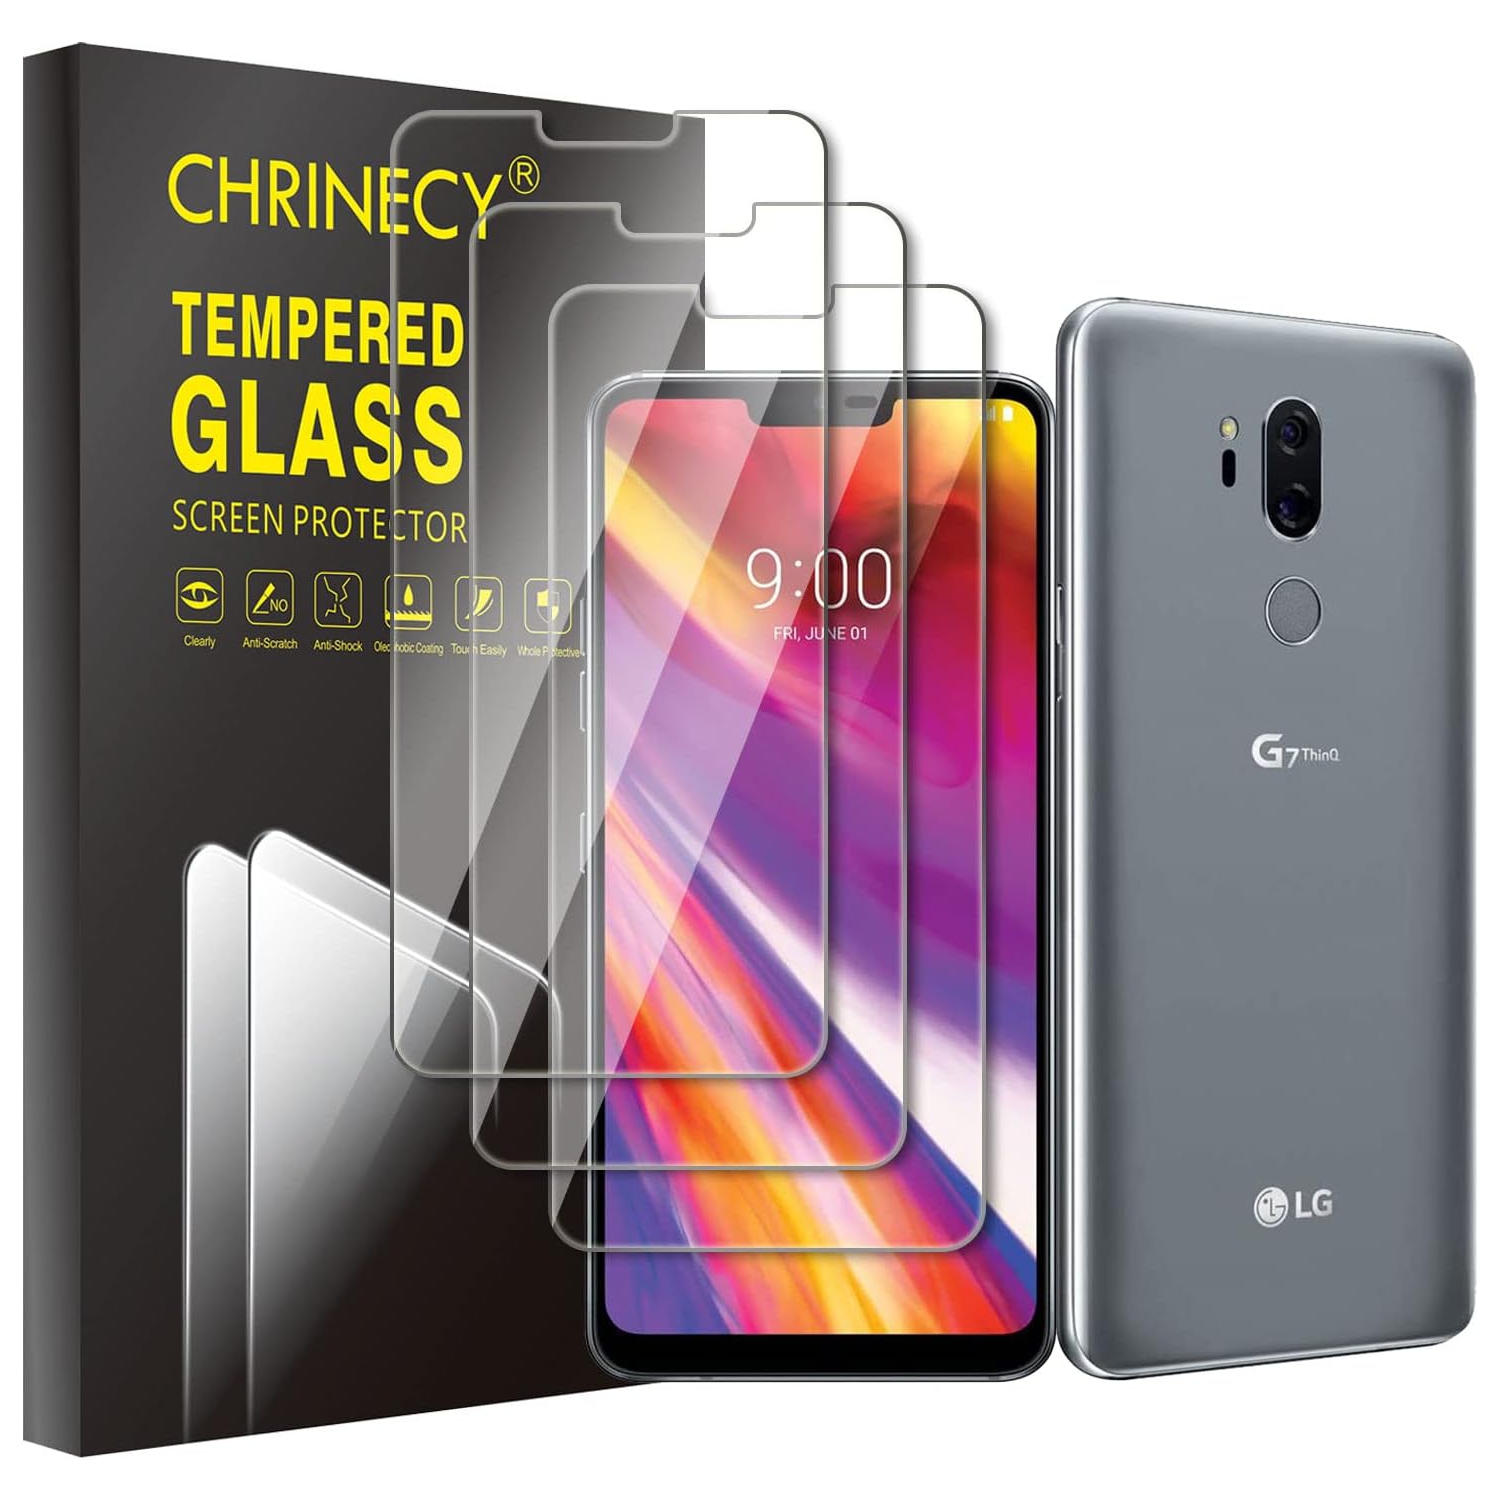 [3 Pack] Screen Protector for LG G7 ThinQ, 9H Hardness Tempered Glass Film, Anti-Scratch, Case Friendly, Premium HD